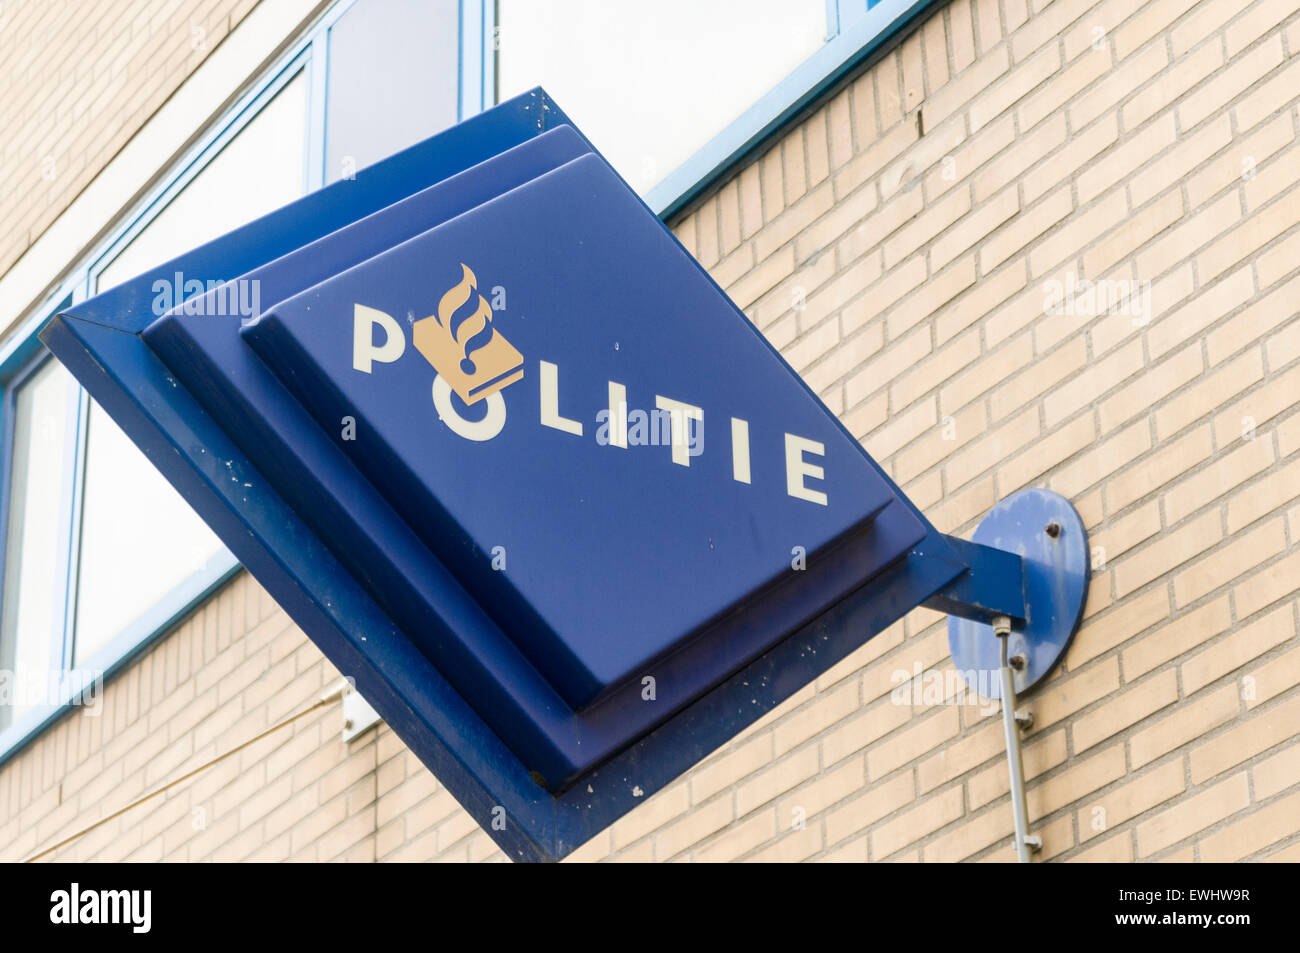 Politie police station in the Hague, Netherlands Stock Photo